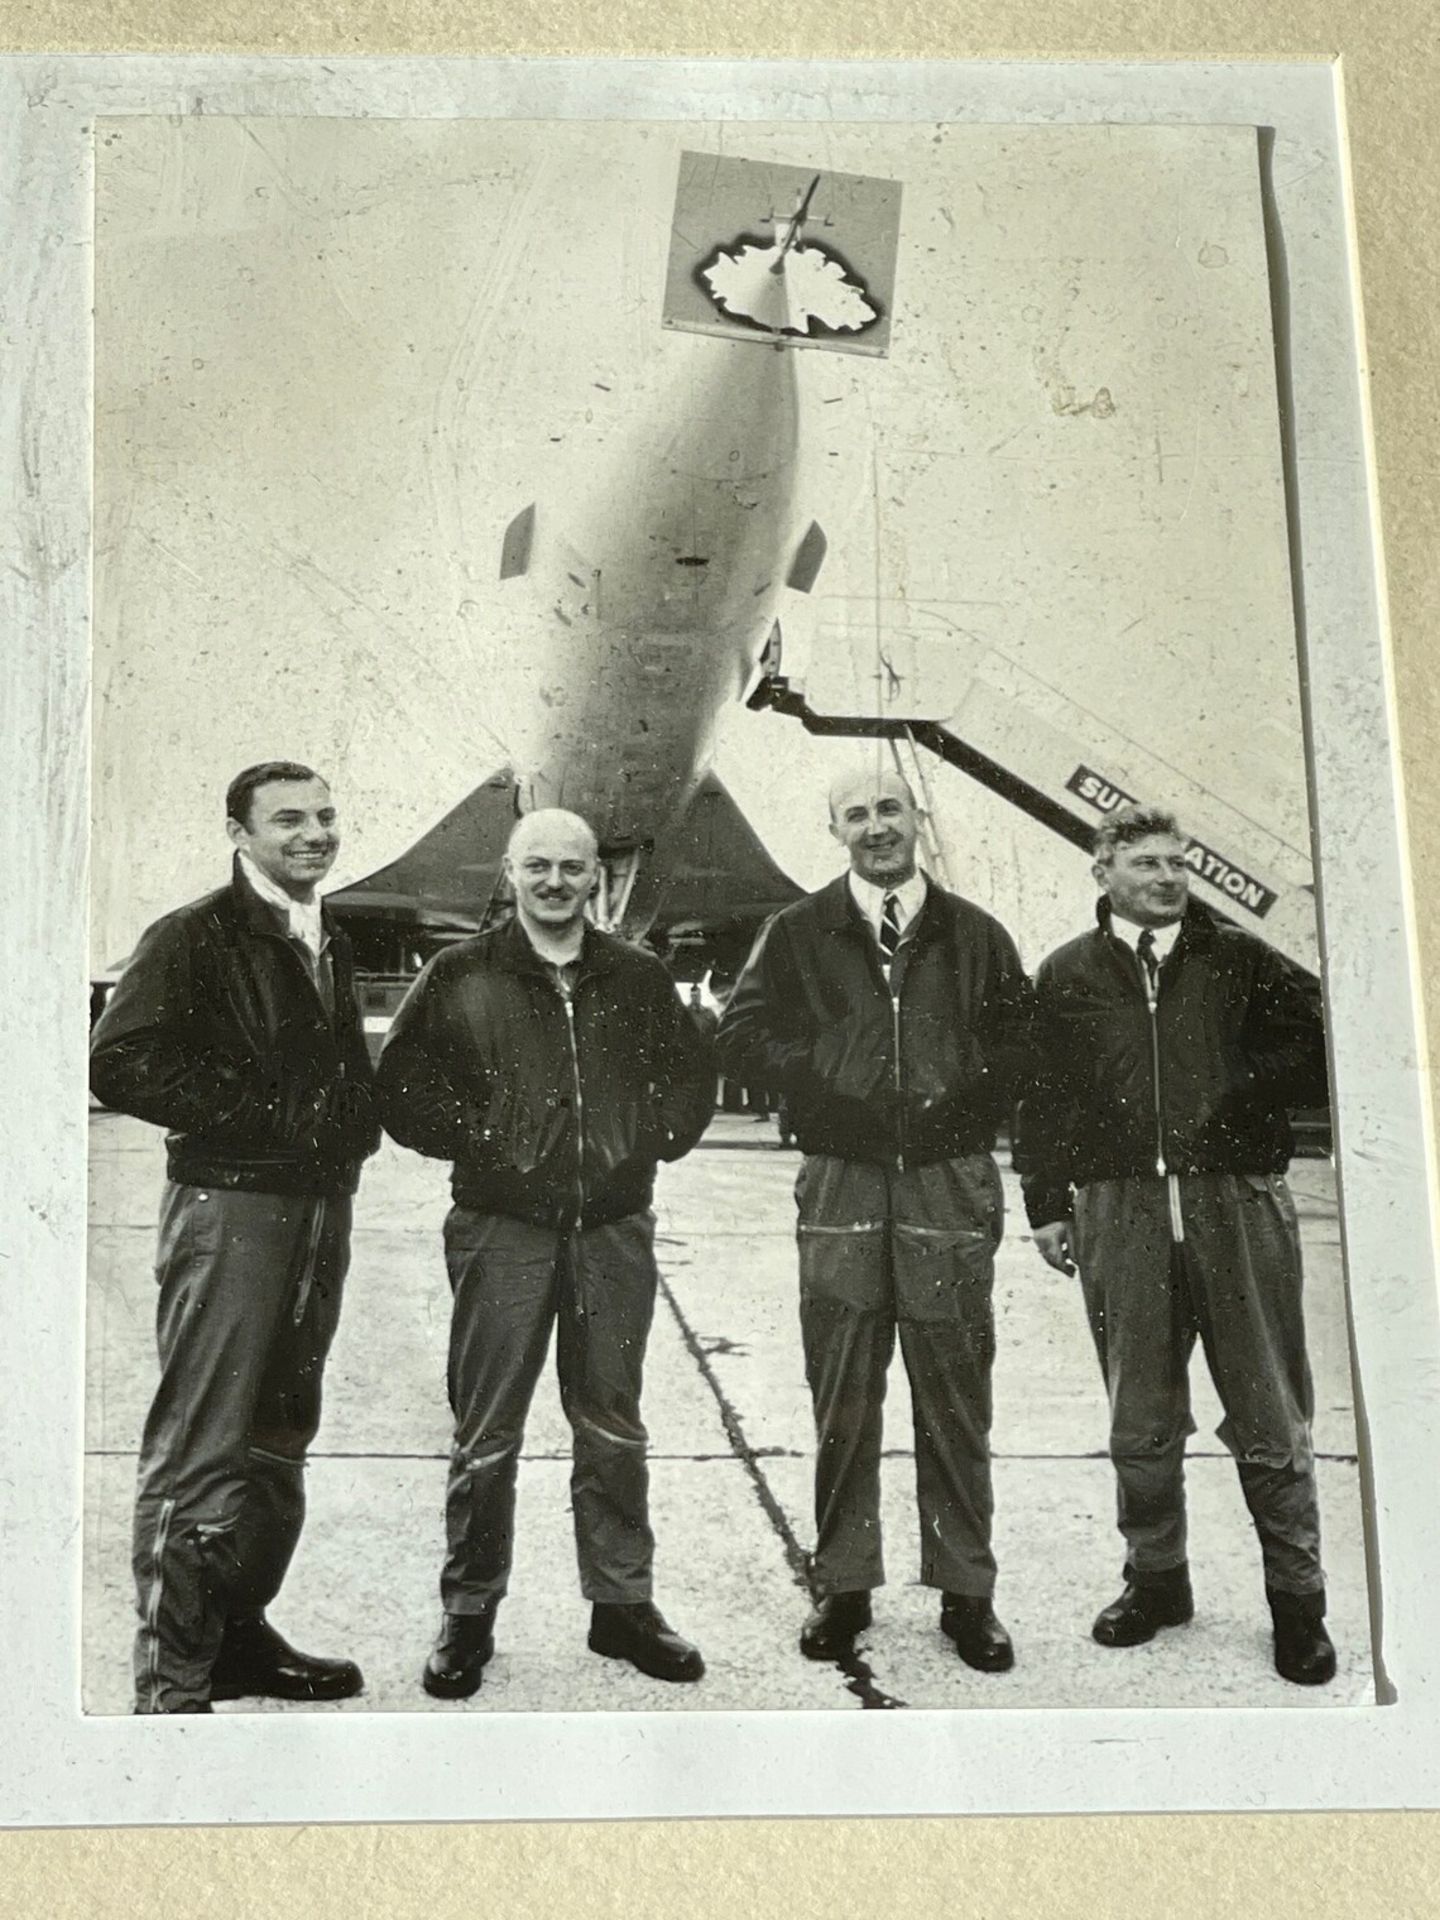 Very collectible picture frame of Air France's original crew members including the chief pilot